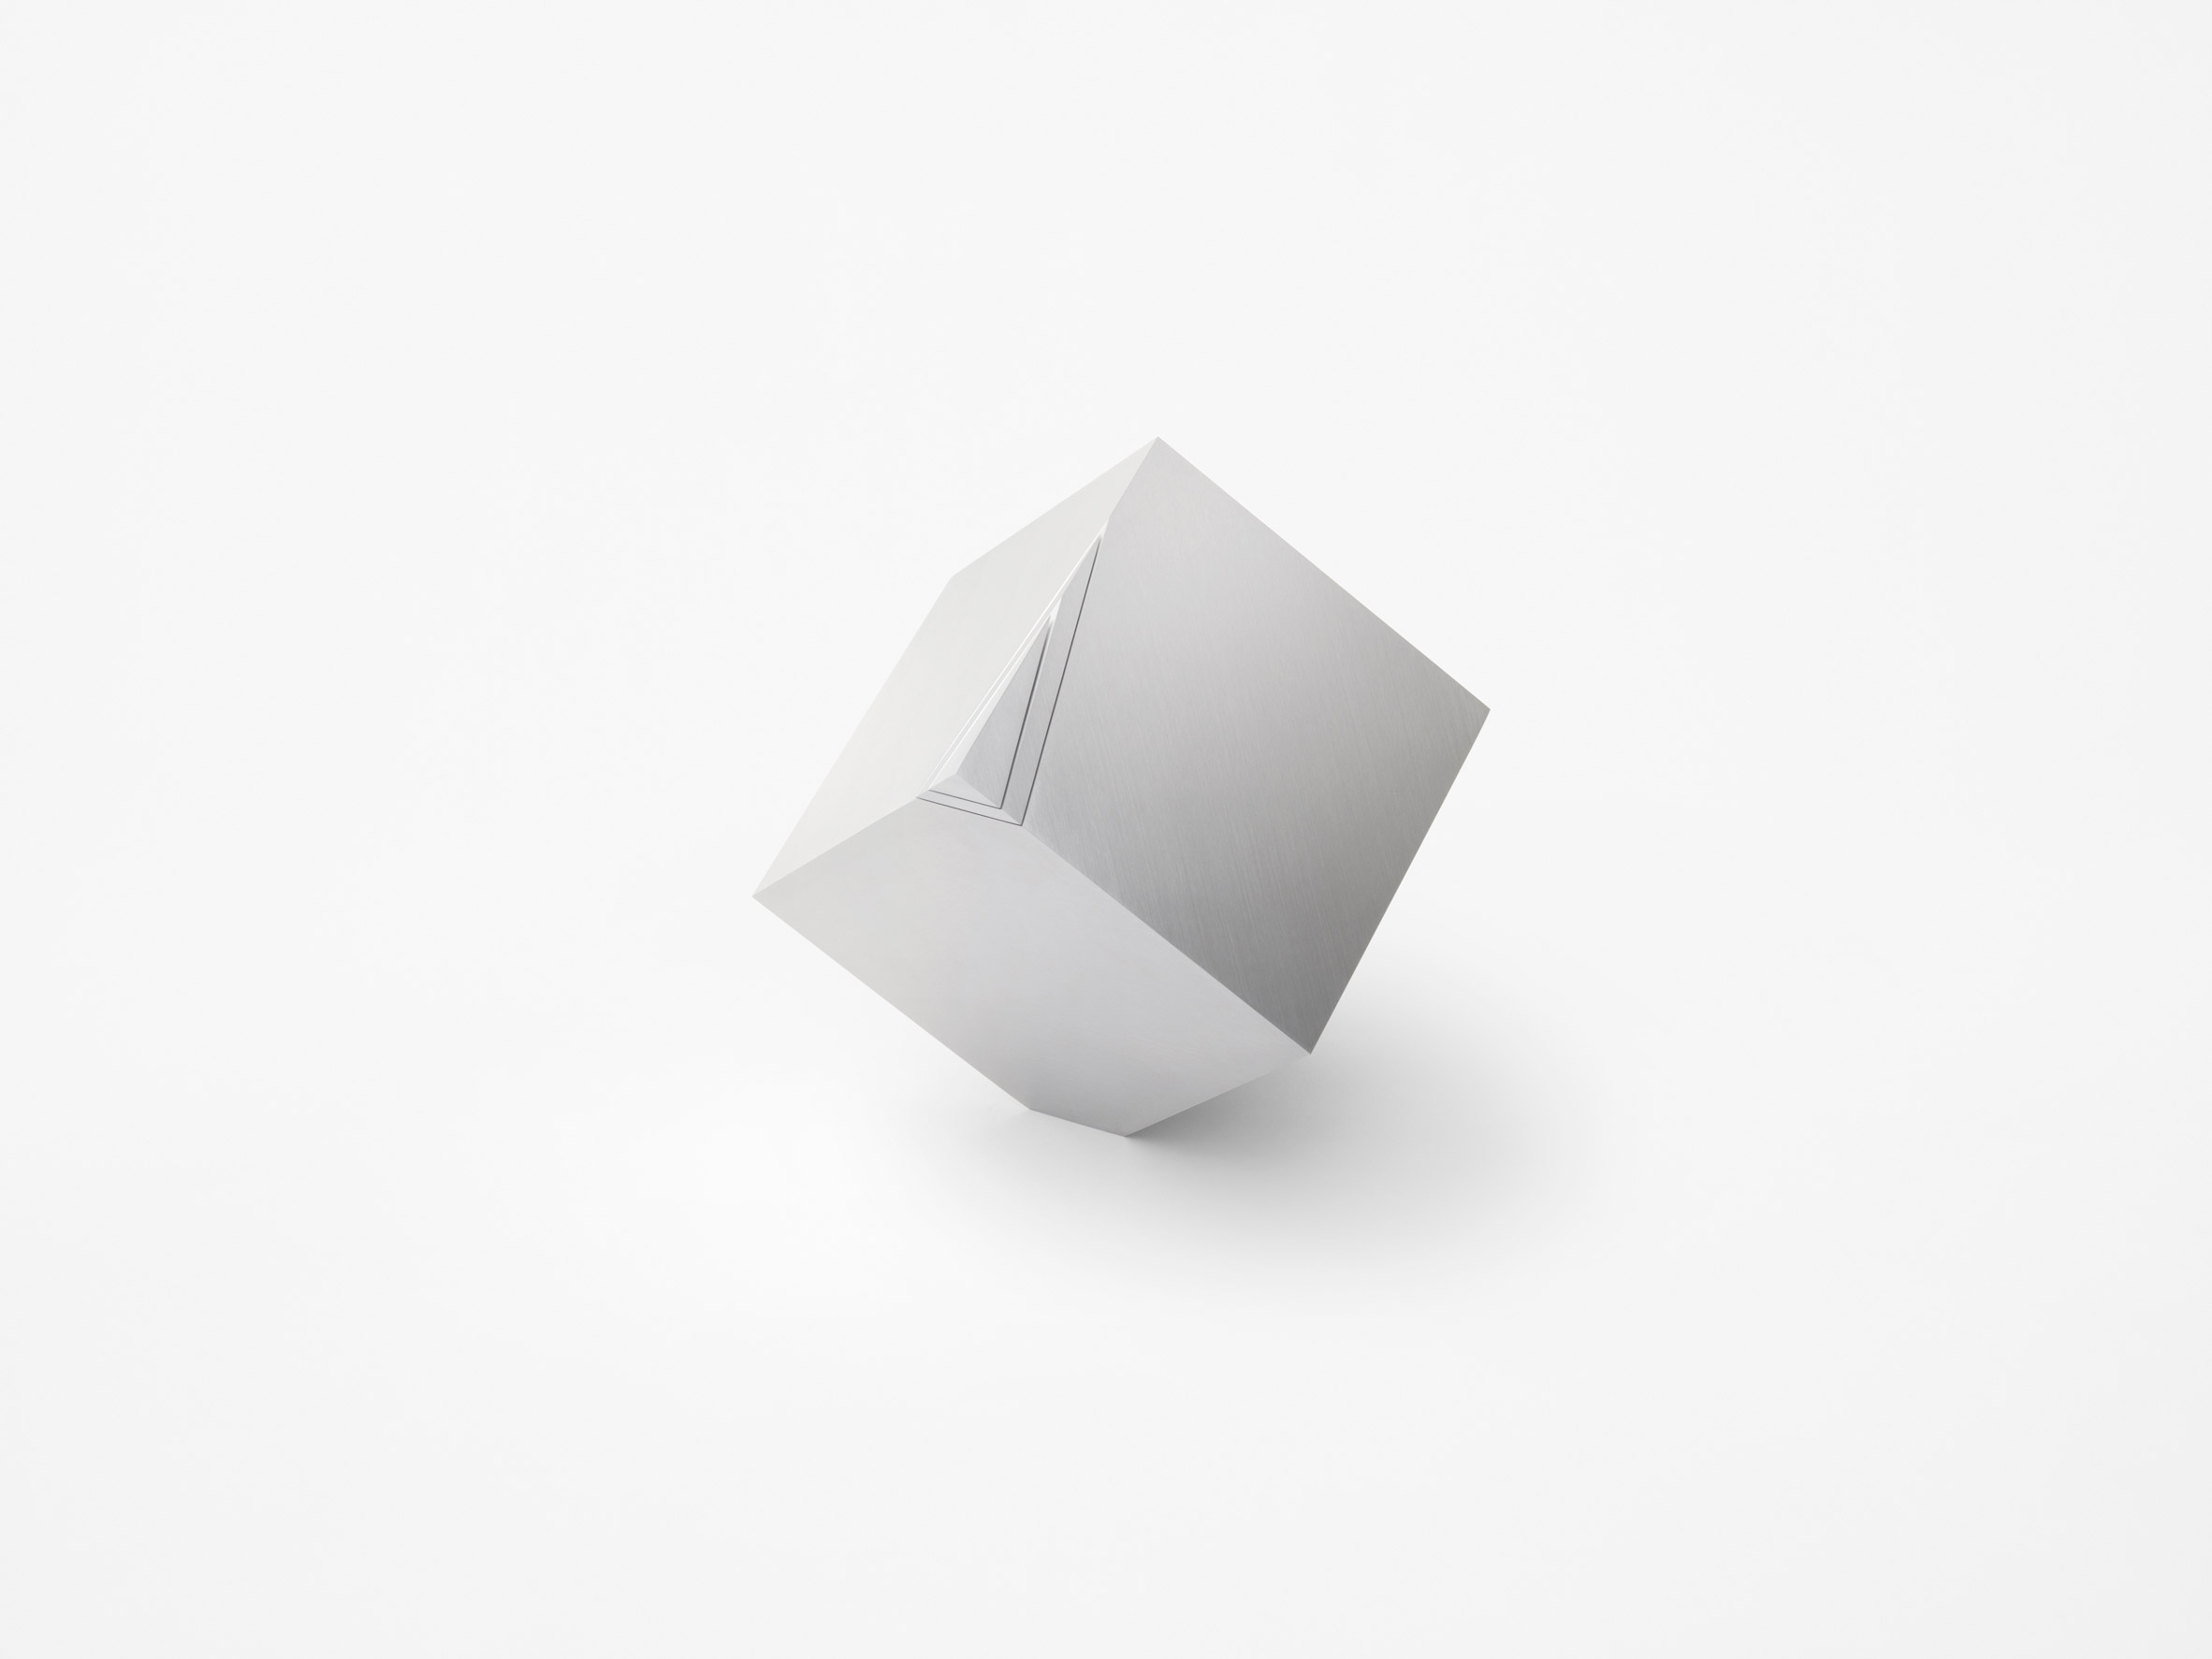 Nendo's Cubic Clock only reveals "its true form" twice per day